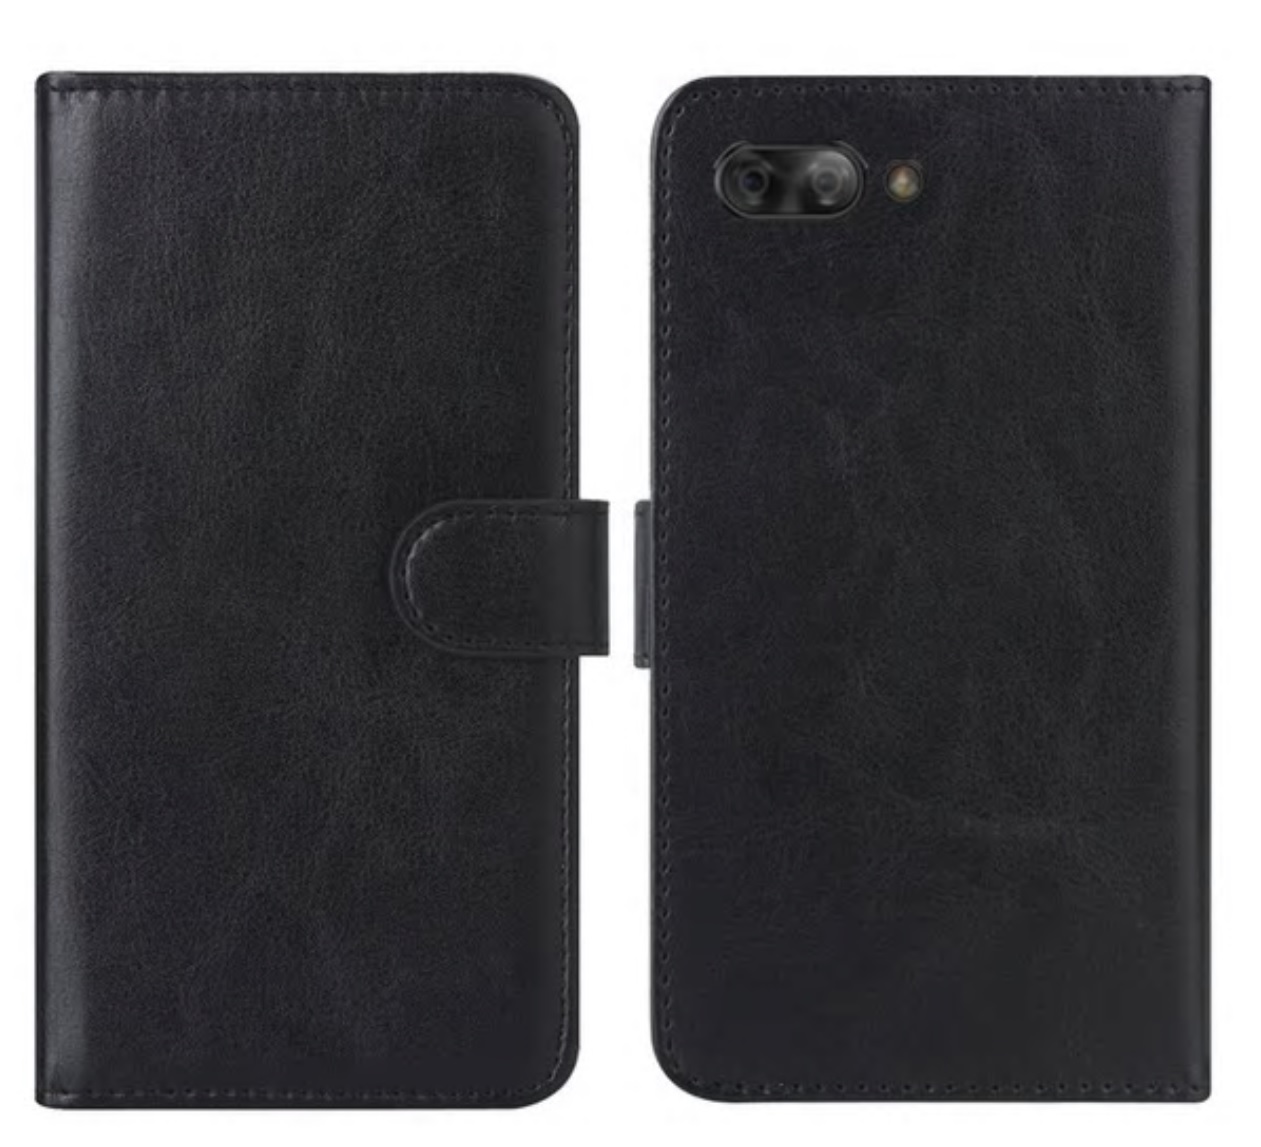 Wallet Flip Stand Leather Case for Blackberry KEY2 cell phone